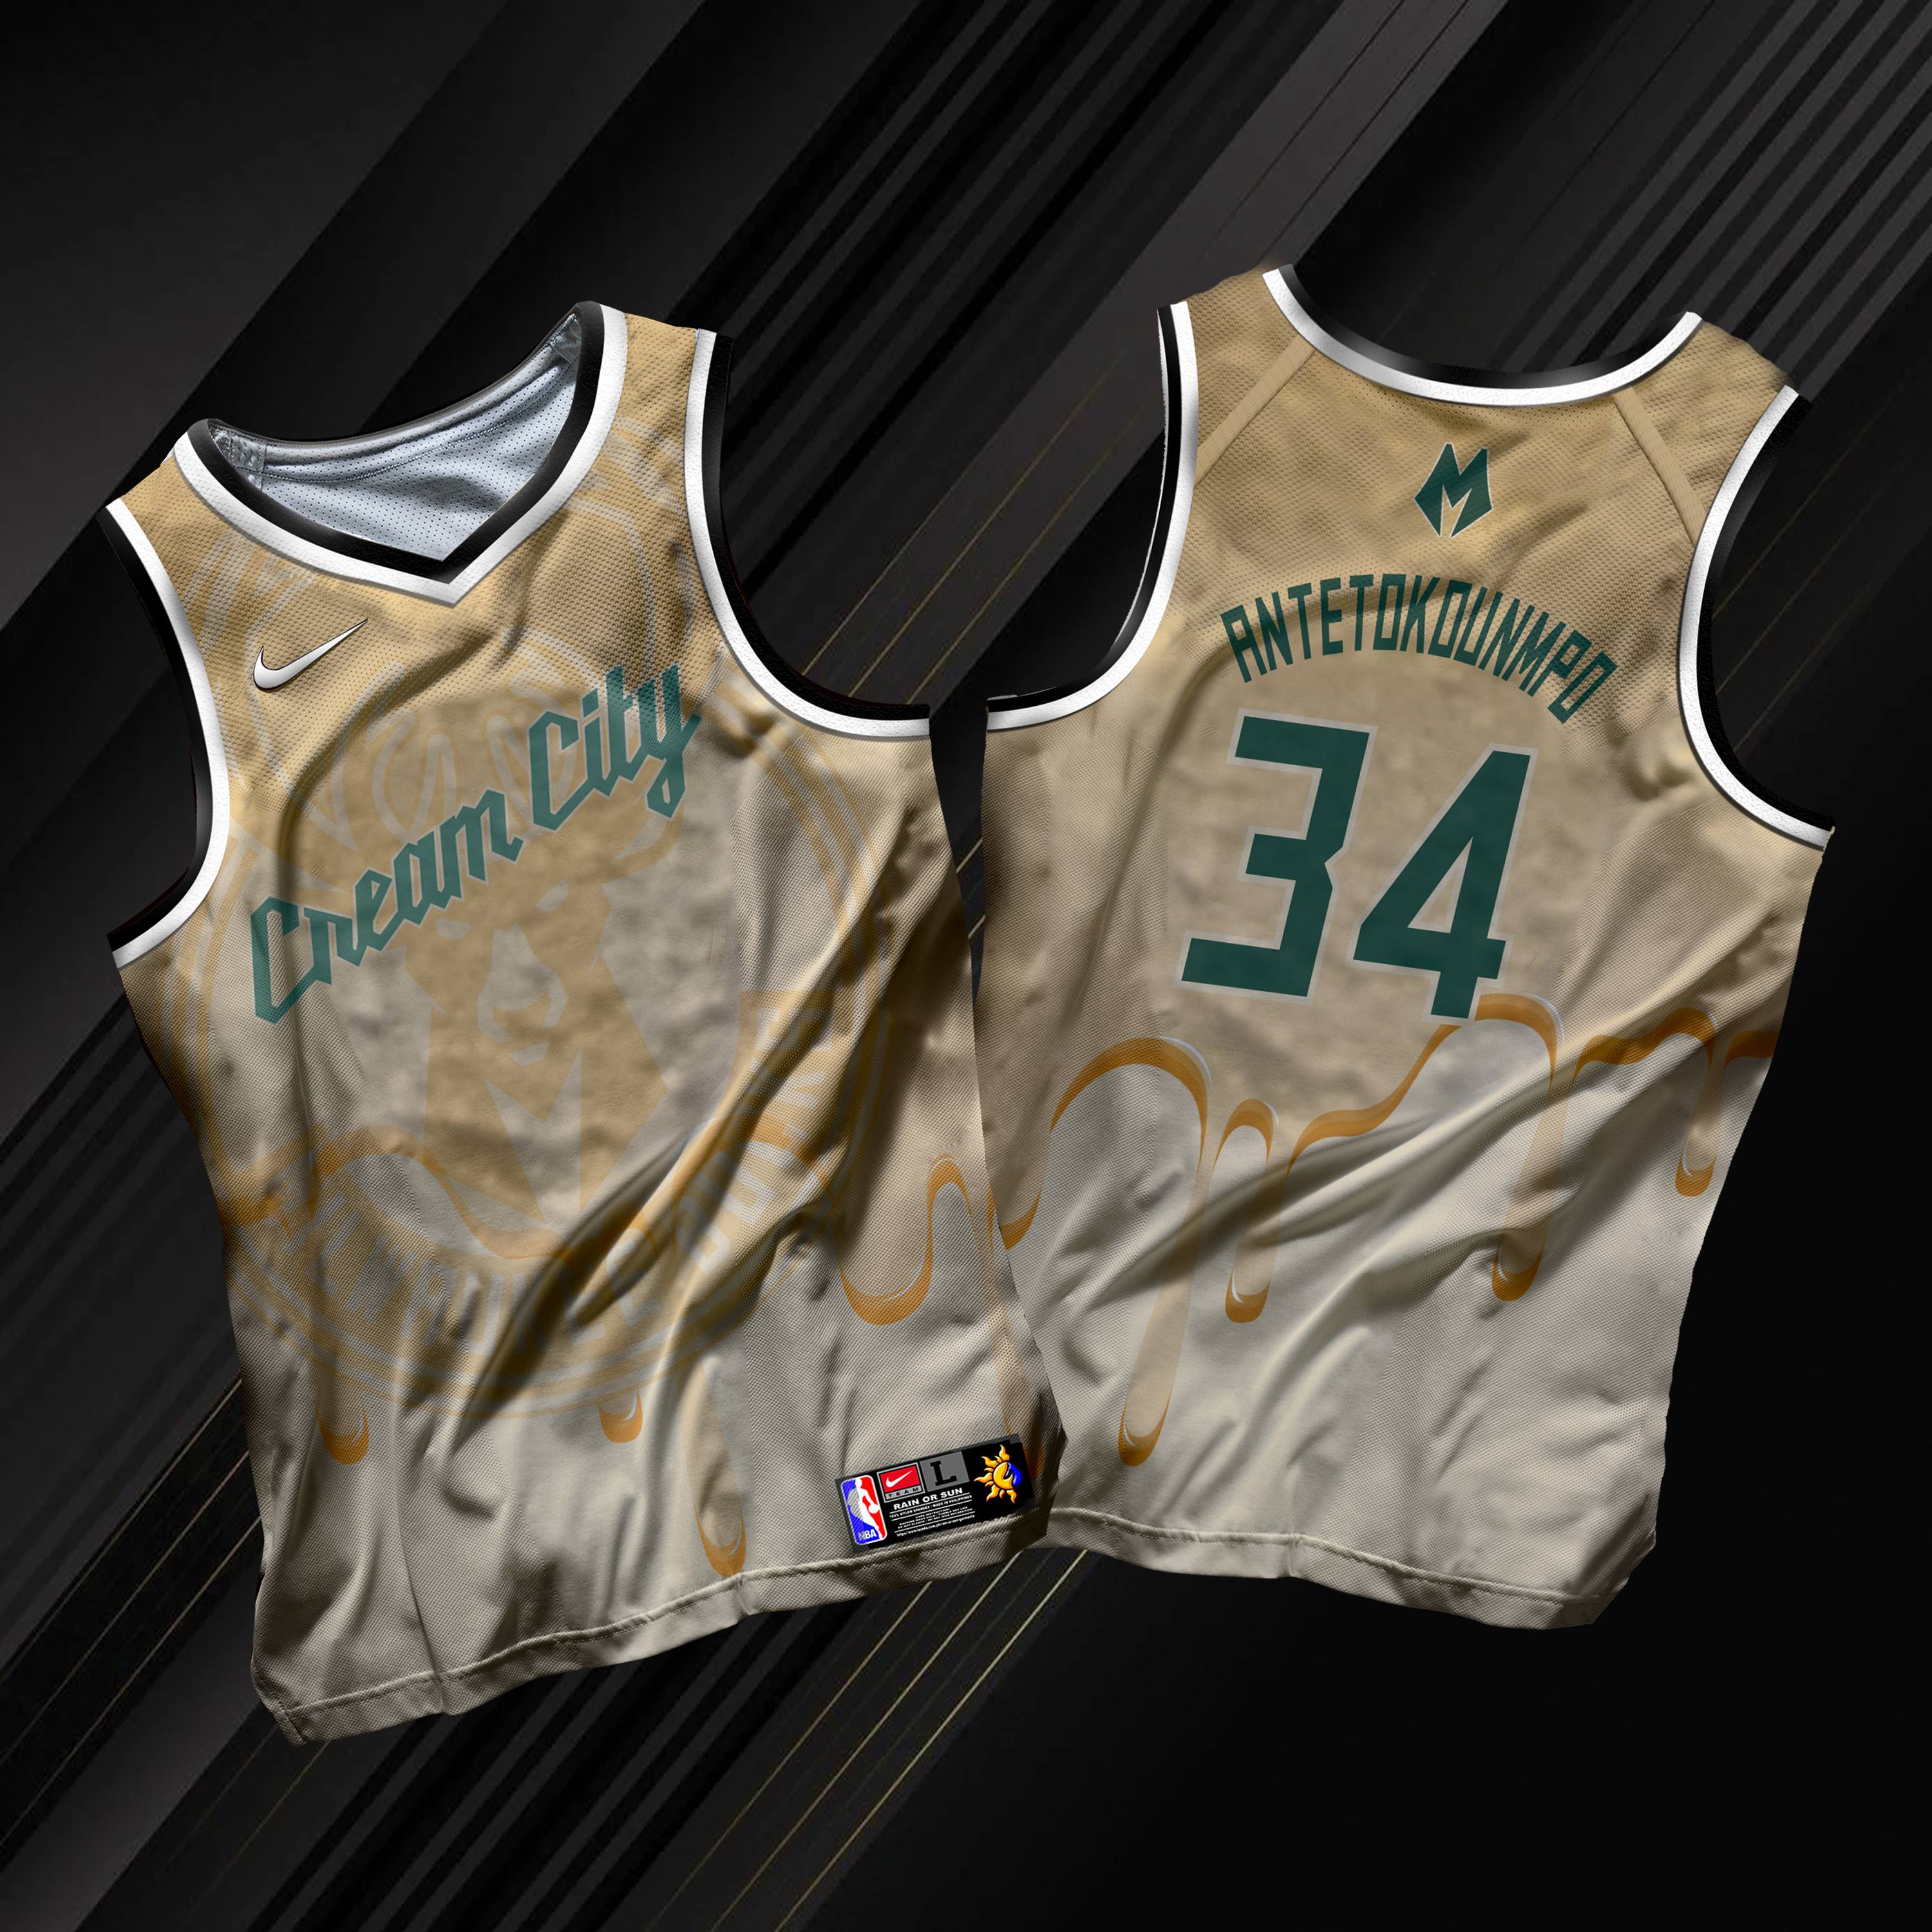 JERSEY MILWAUKEE 03 CREAM CITY GIANNIS ANTETOKOUNMPO BASKETBALL JERSEY FREE  CUSTOMIZE NAME AND NUMBER ONLY full sublimation high quality fabrics/  basketball jersey